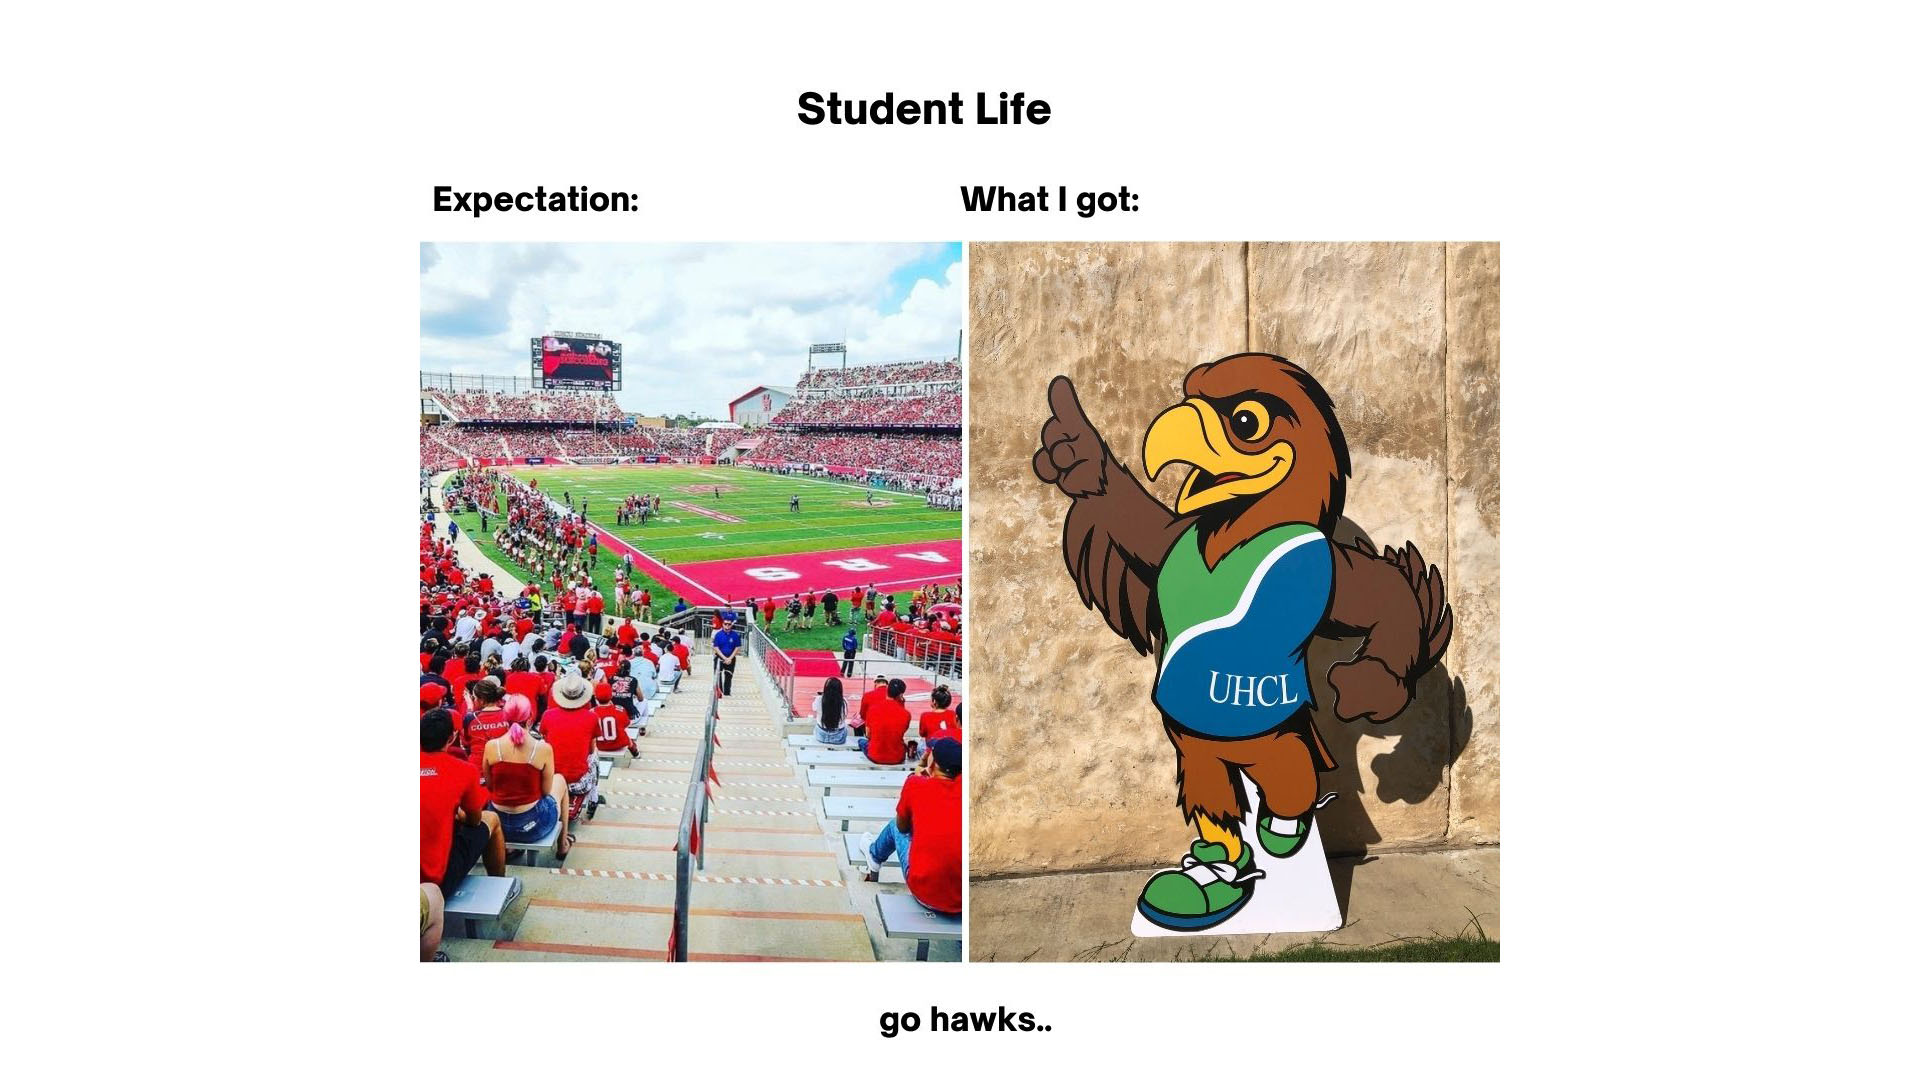 Title: Student Life. One half of the image is labeled "Expectations" and shows a University of Houston Football Game. Another label states "What I got" and shows a picture of Hunter Hawk.